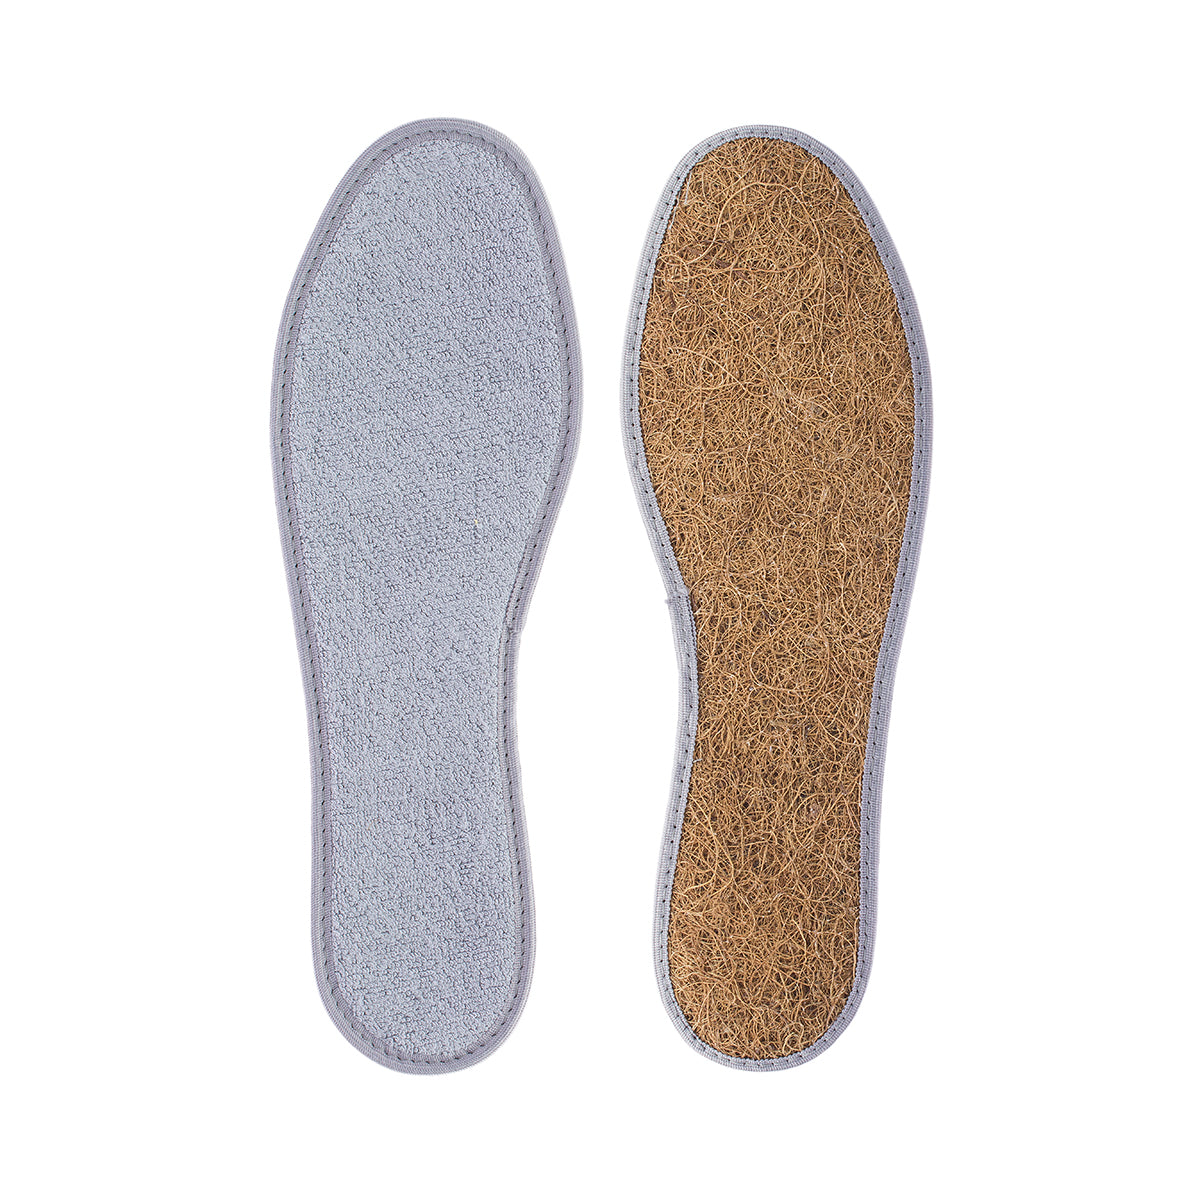 Bamboo Comfort Insole